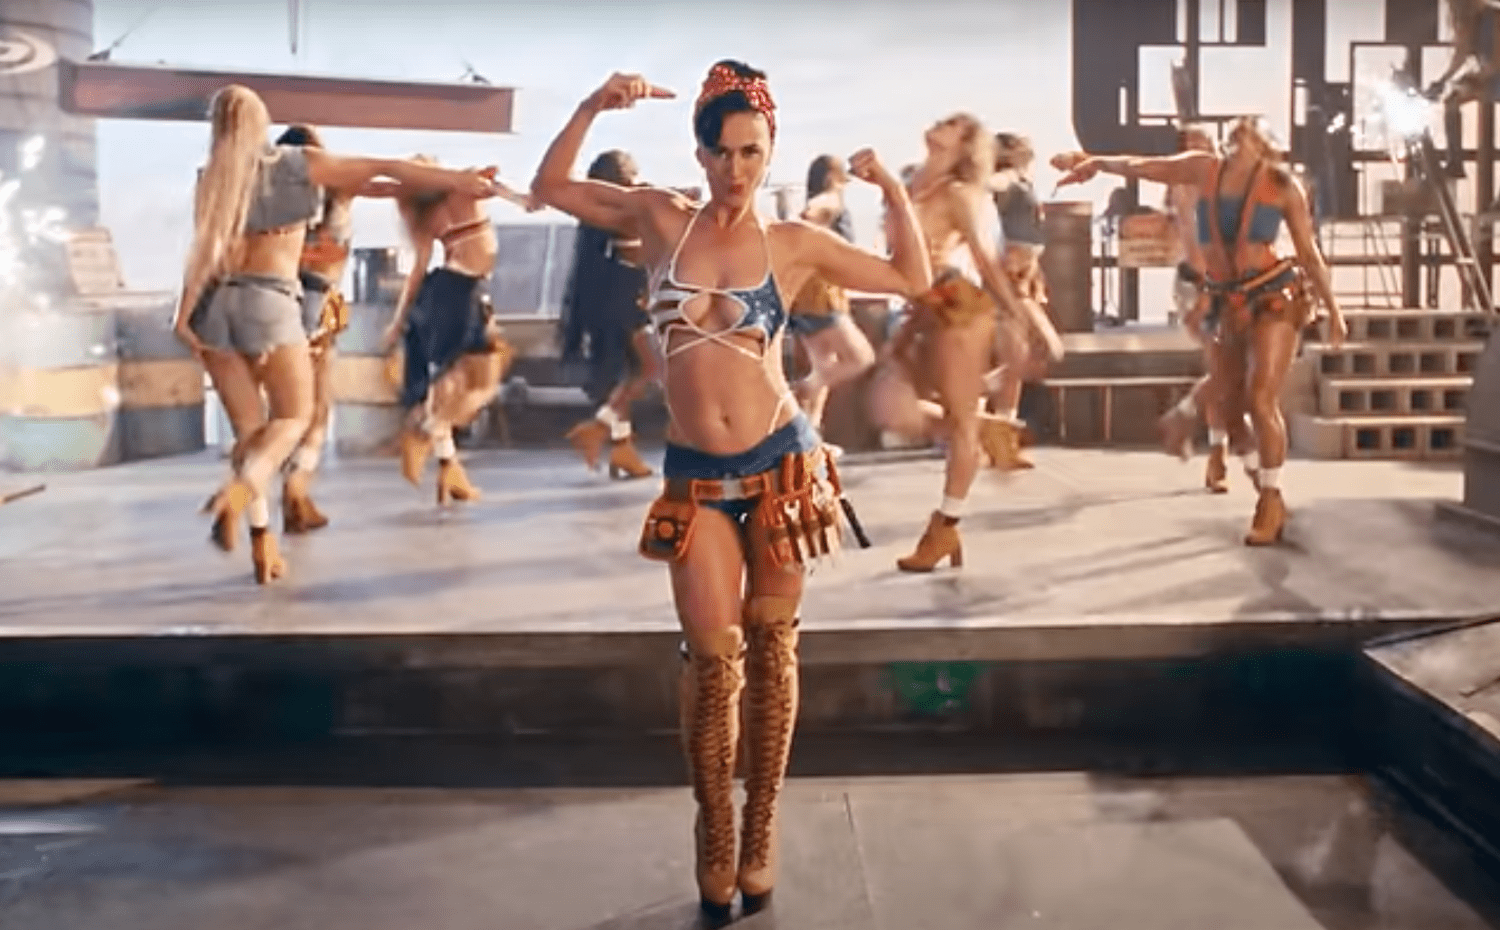 Katy Perry's 'Woman's World' music video gets mixed reactions